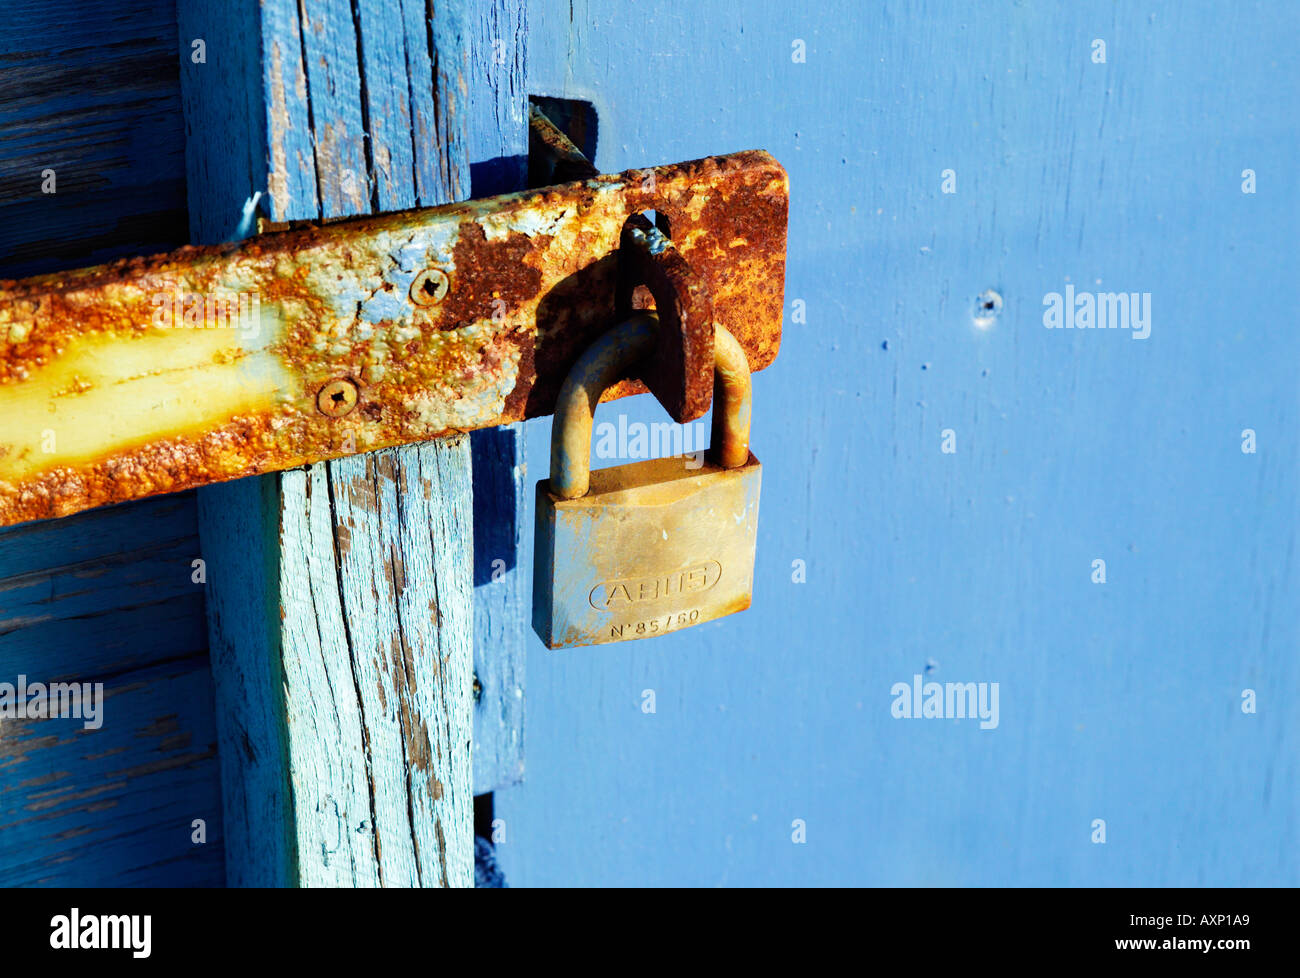 A padlock on the end of a rusty metal used to lock up a beach hut Stock Photo